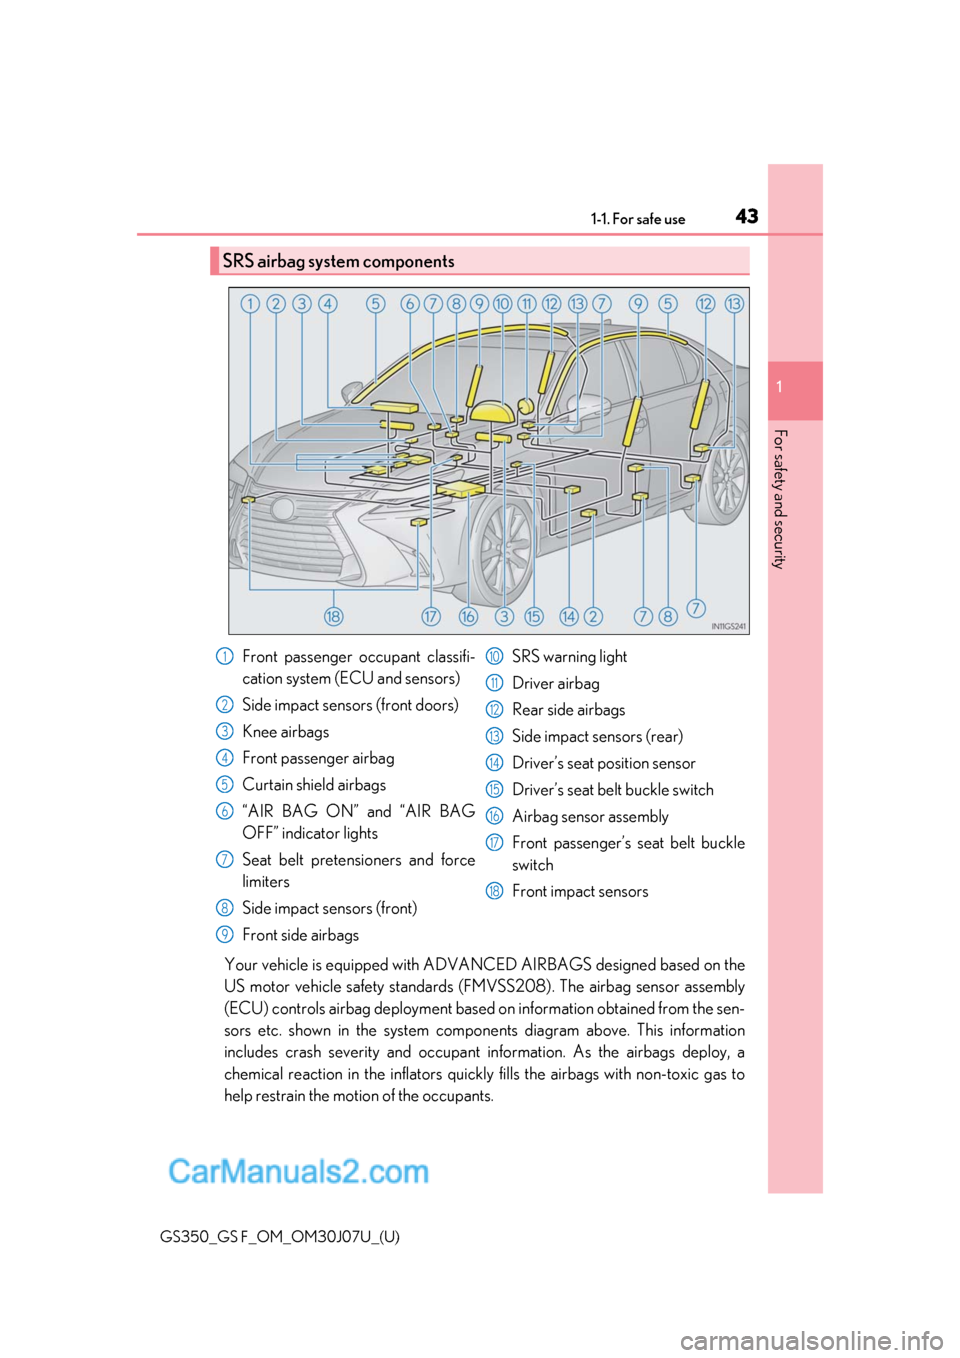 Lexus GS F 2020  Owners Manuals 431-1. For safe use
GS350_GS F_OM_OM30J07U_(U)
1
For safety and security
Your vehicle is equipped with ADVA NCED AIRBAGS designed based on the
US motor vehicle safety standards (F MVSS208). The airbag